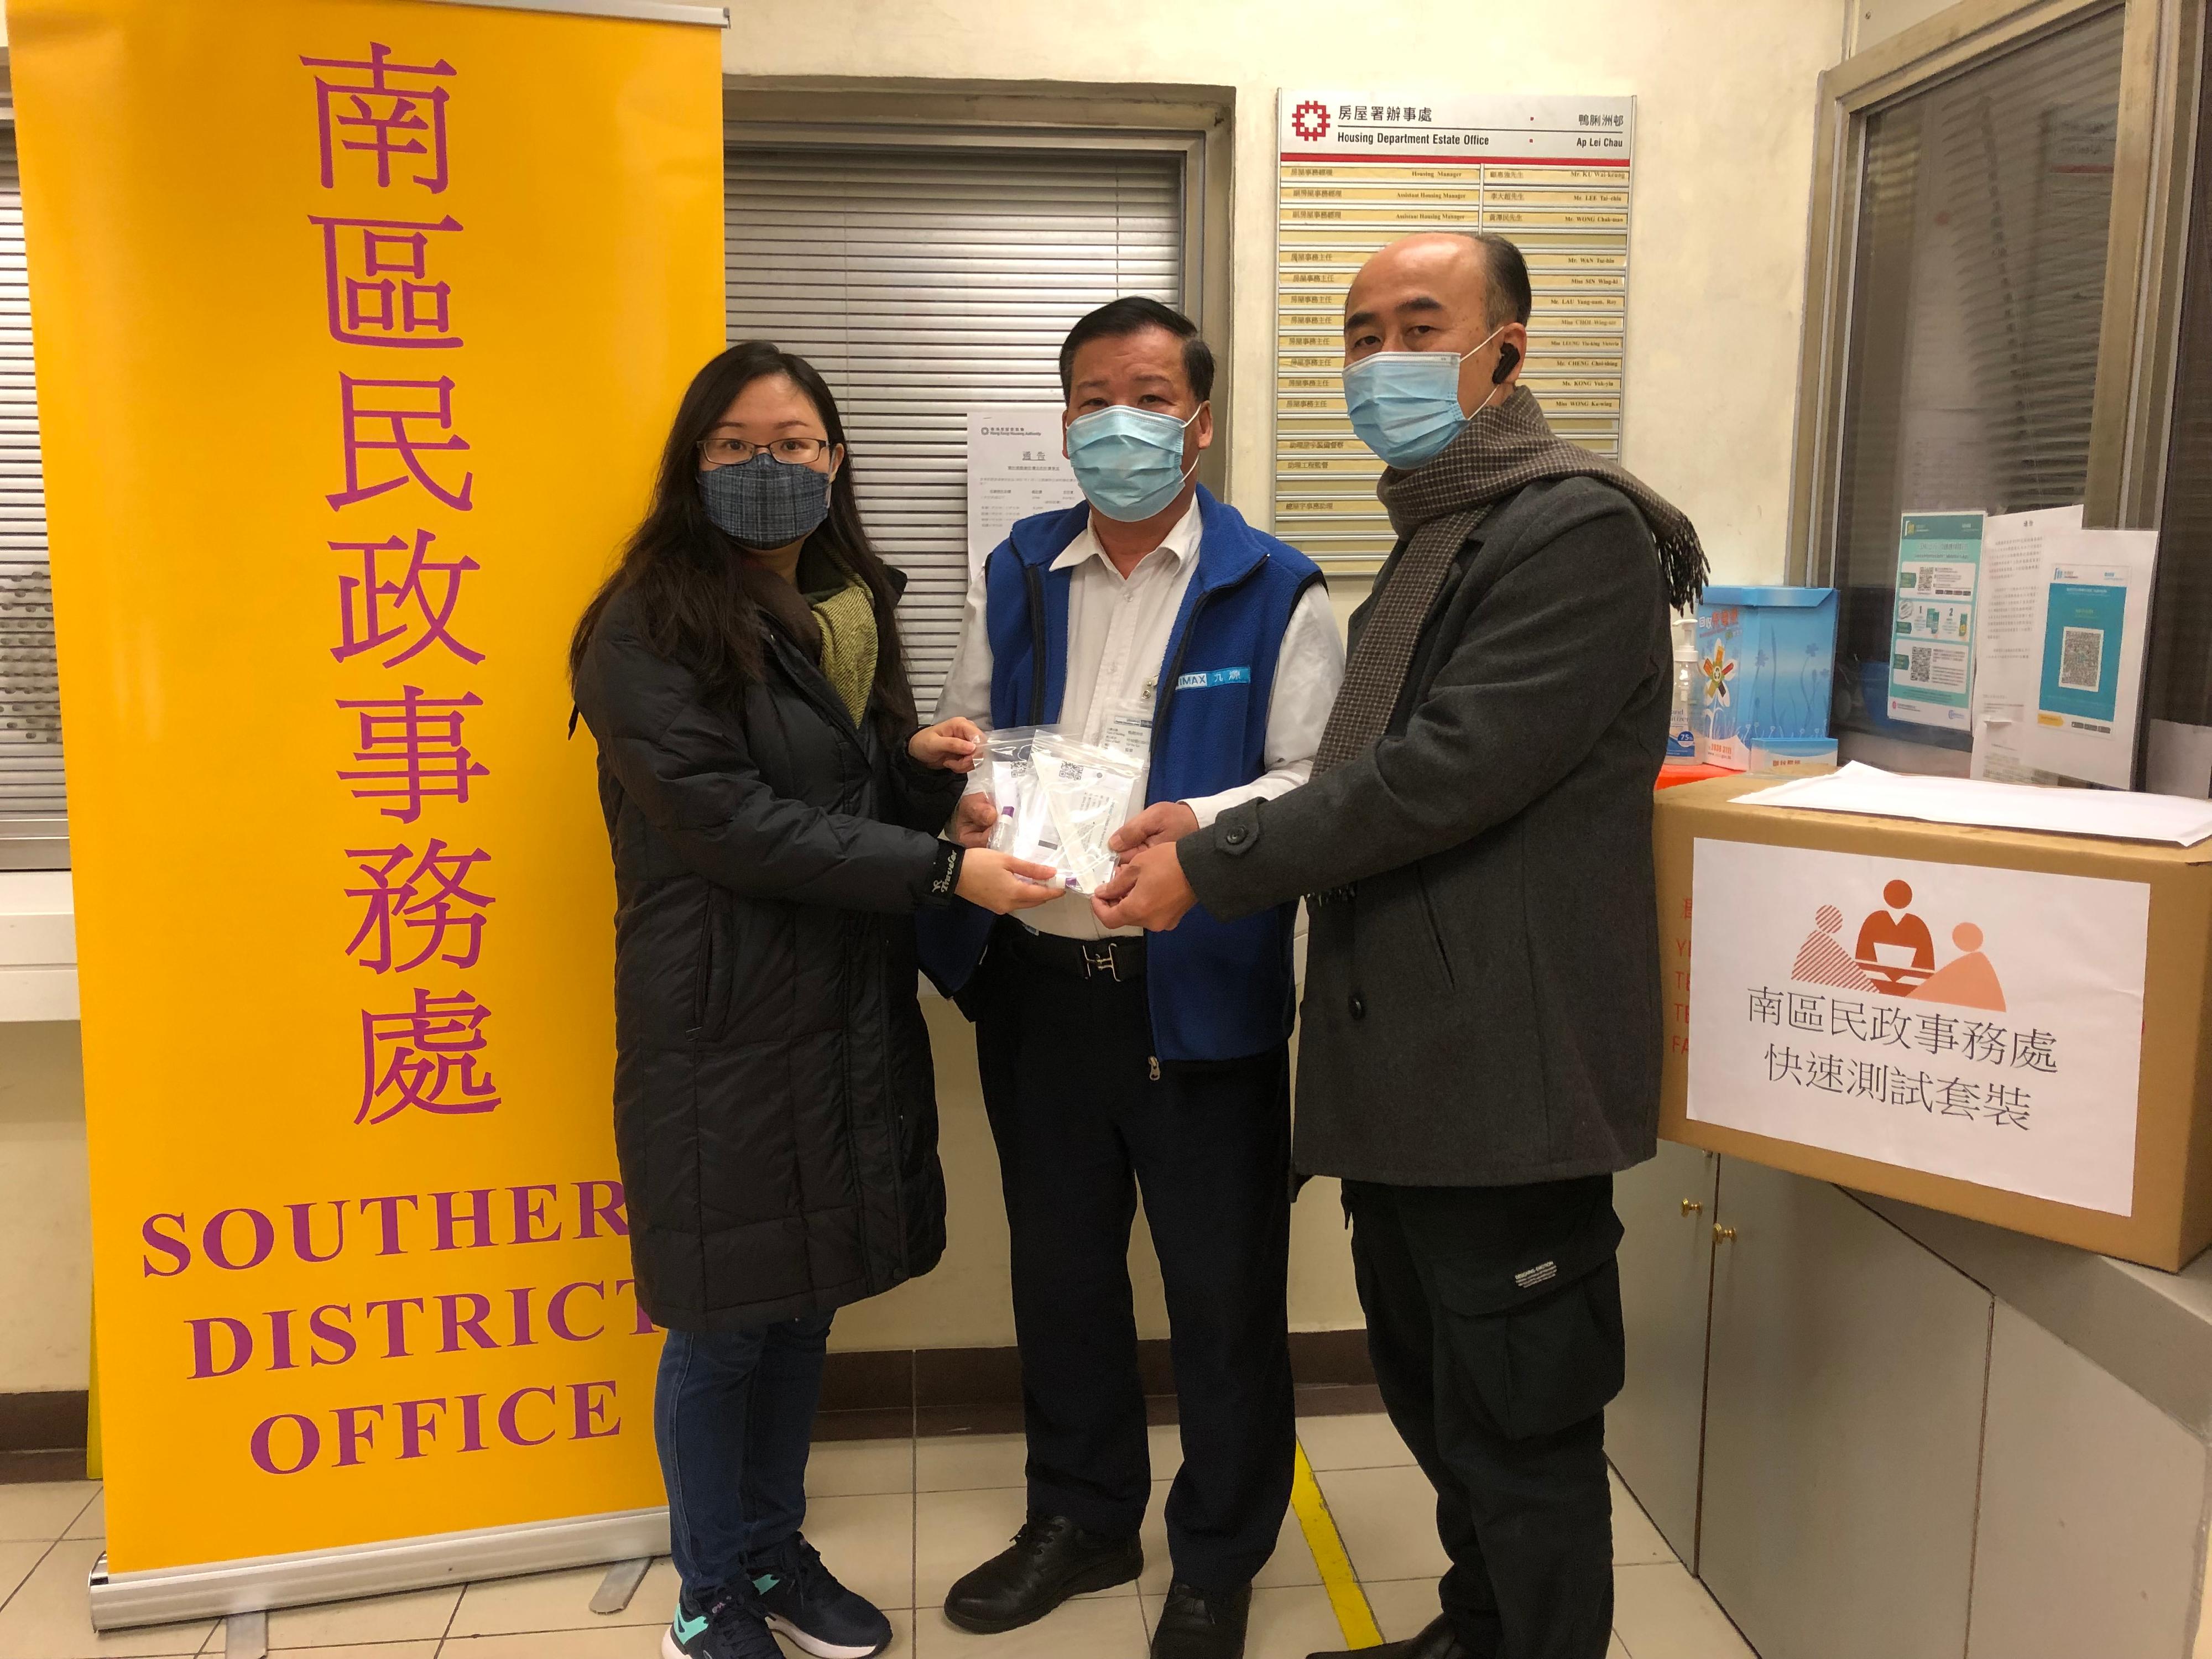 The Southern District Office today (February 20) distributed COVID-19 rapid test kits to cleansing workers and property management staff working in Ap Lei Chau Estate for voluntary testing through the Housing Department and the Estate’s property management company.